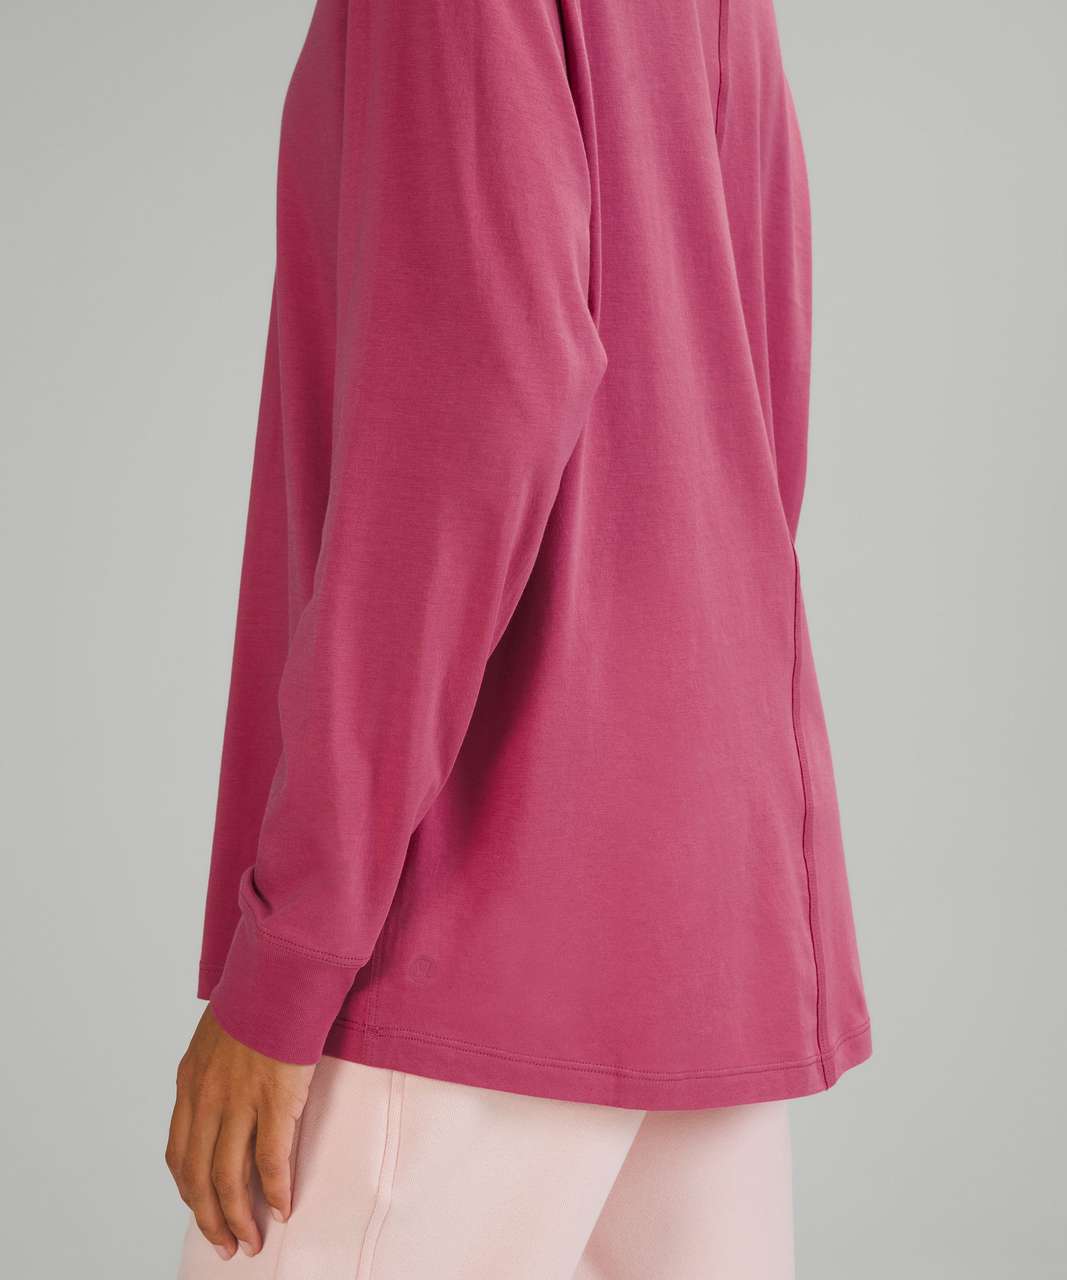 Lululemon All Yours Long Sleeve Shirt In Pink Lychee